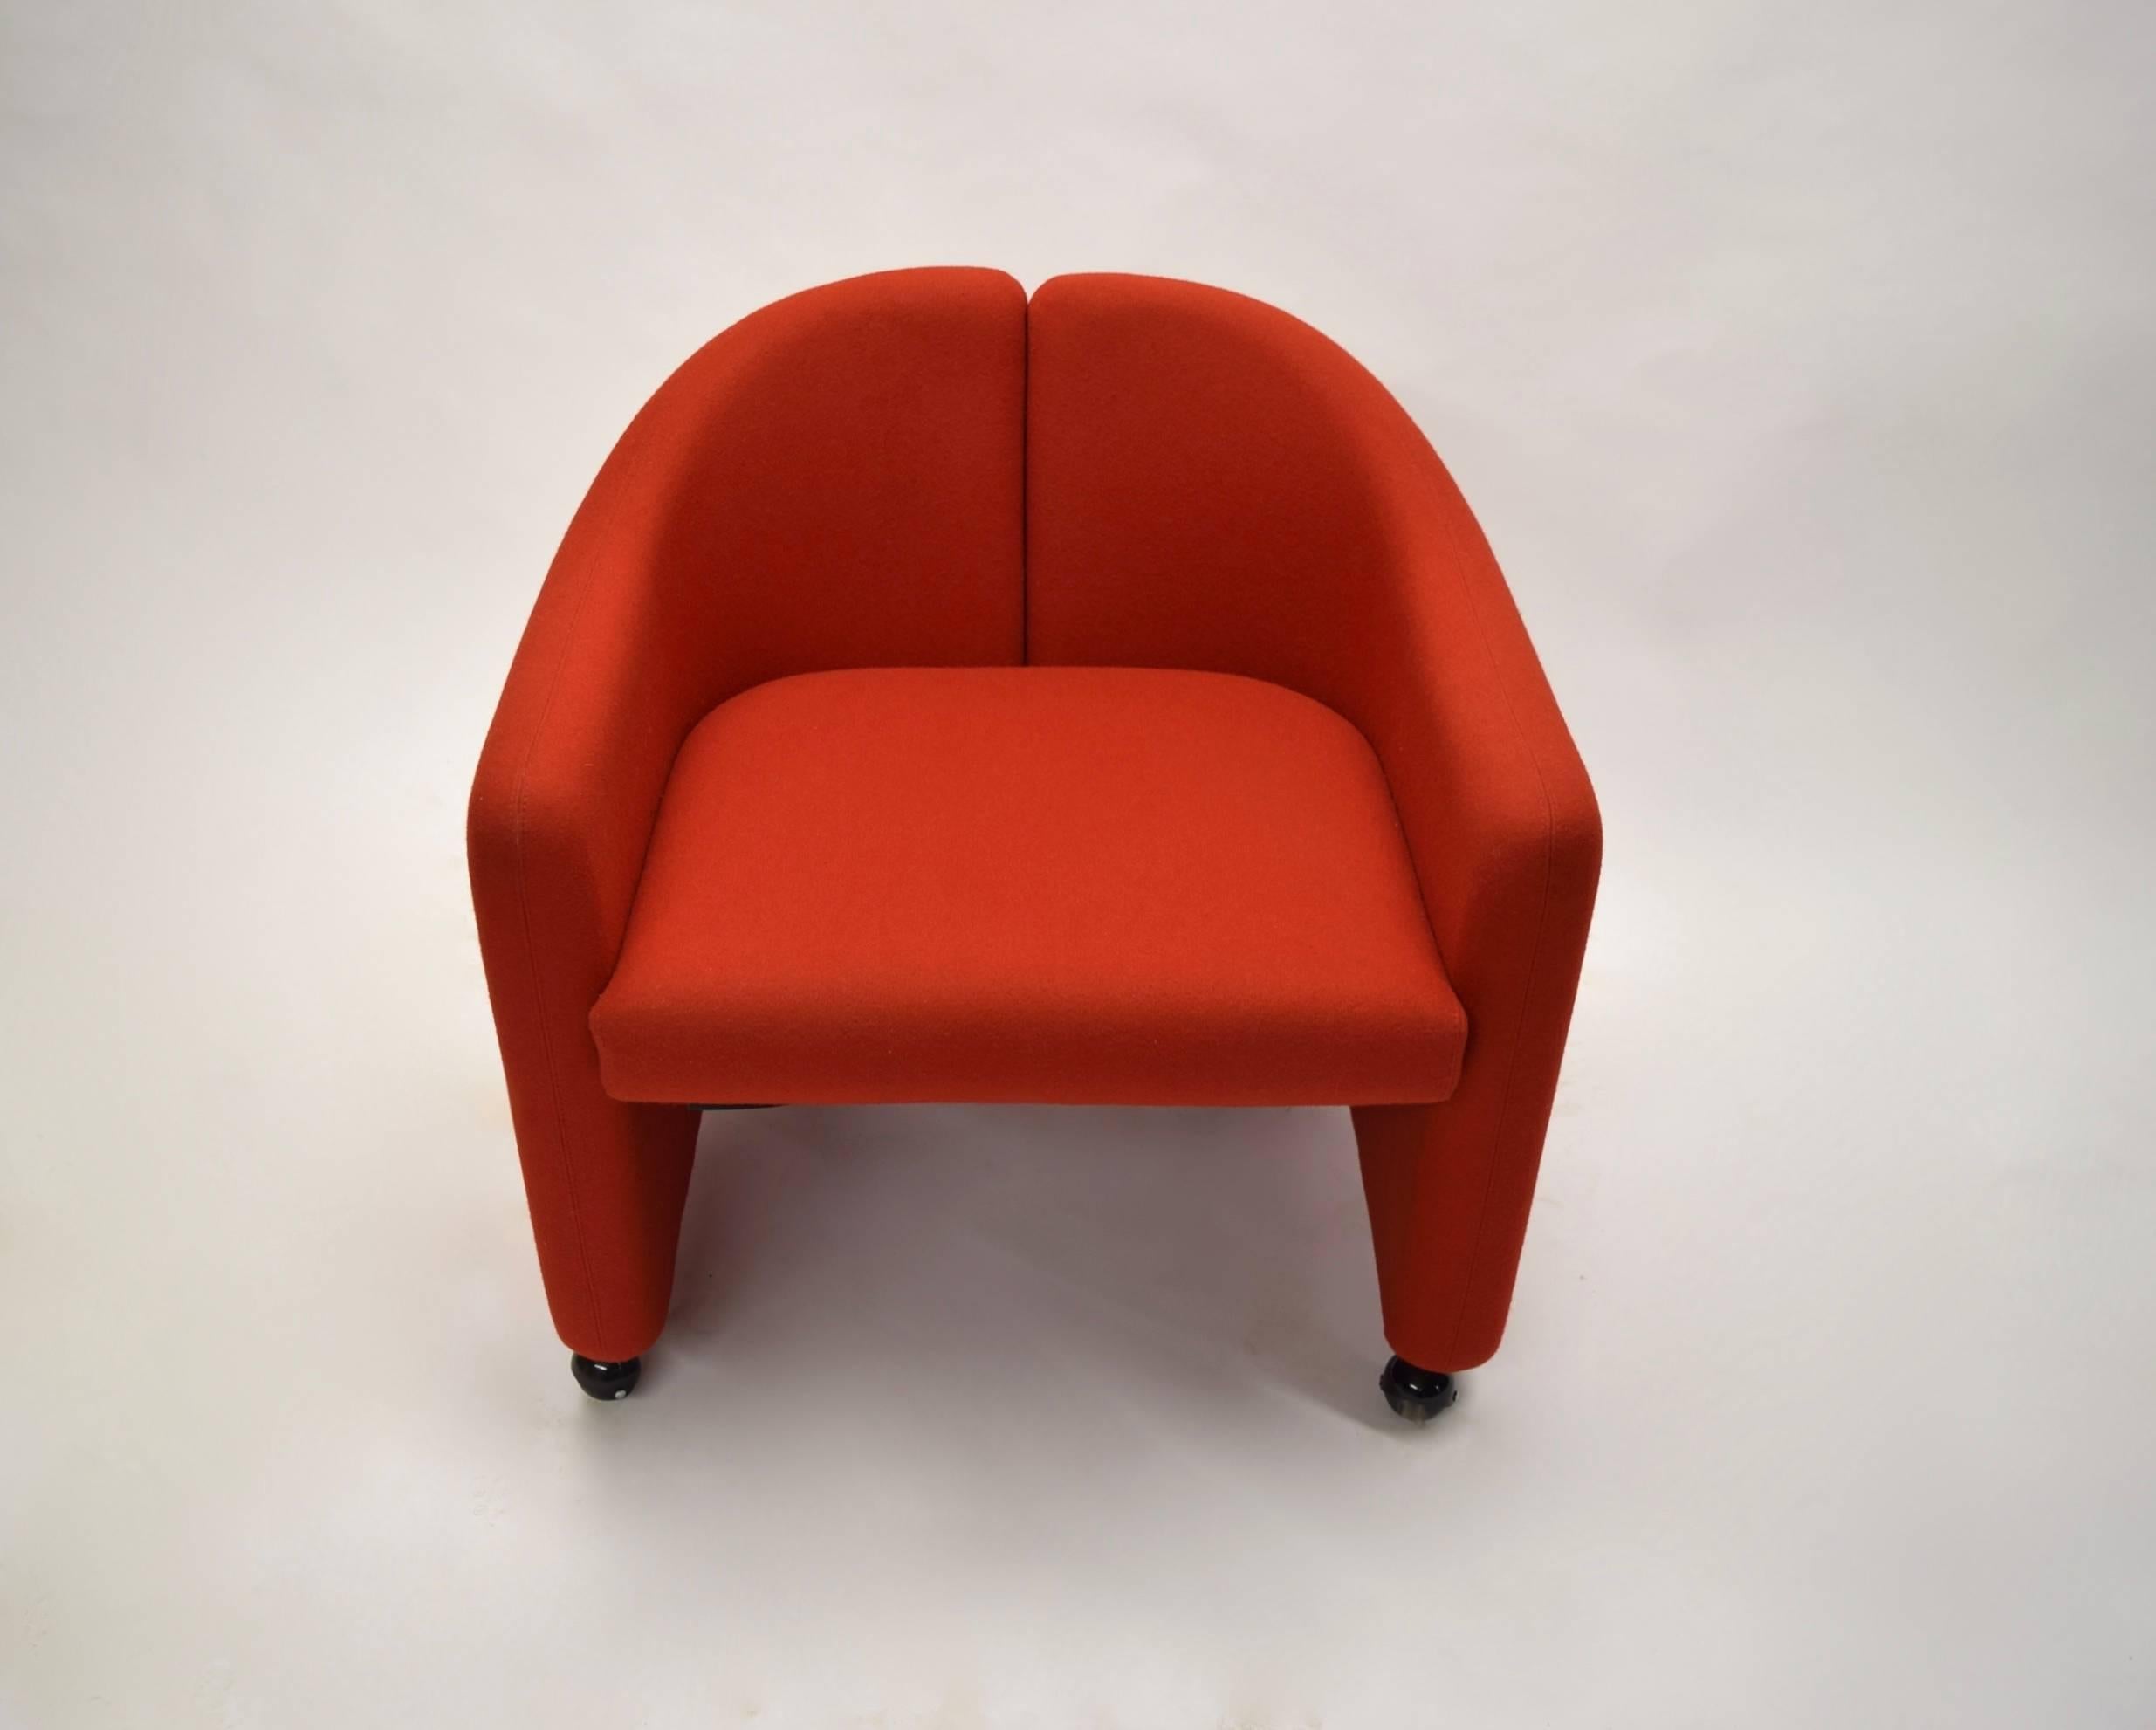 Dining, game or side chairs have a split barrel back an inset seat cushion supporters on four rolling casters. The two chairs have the original stretch red fabric supplied by Racine a French fabric house no longer in production.